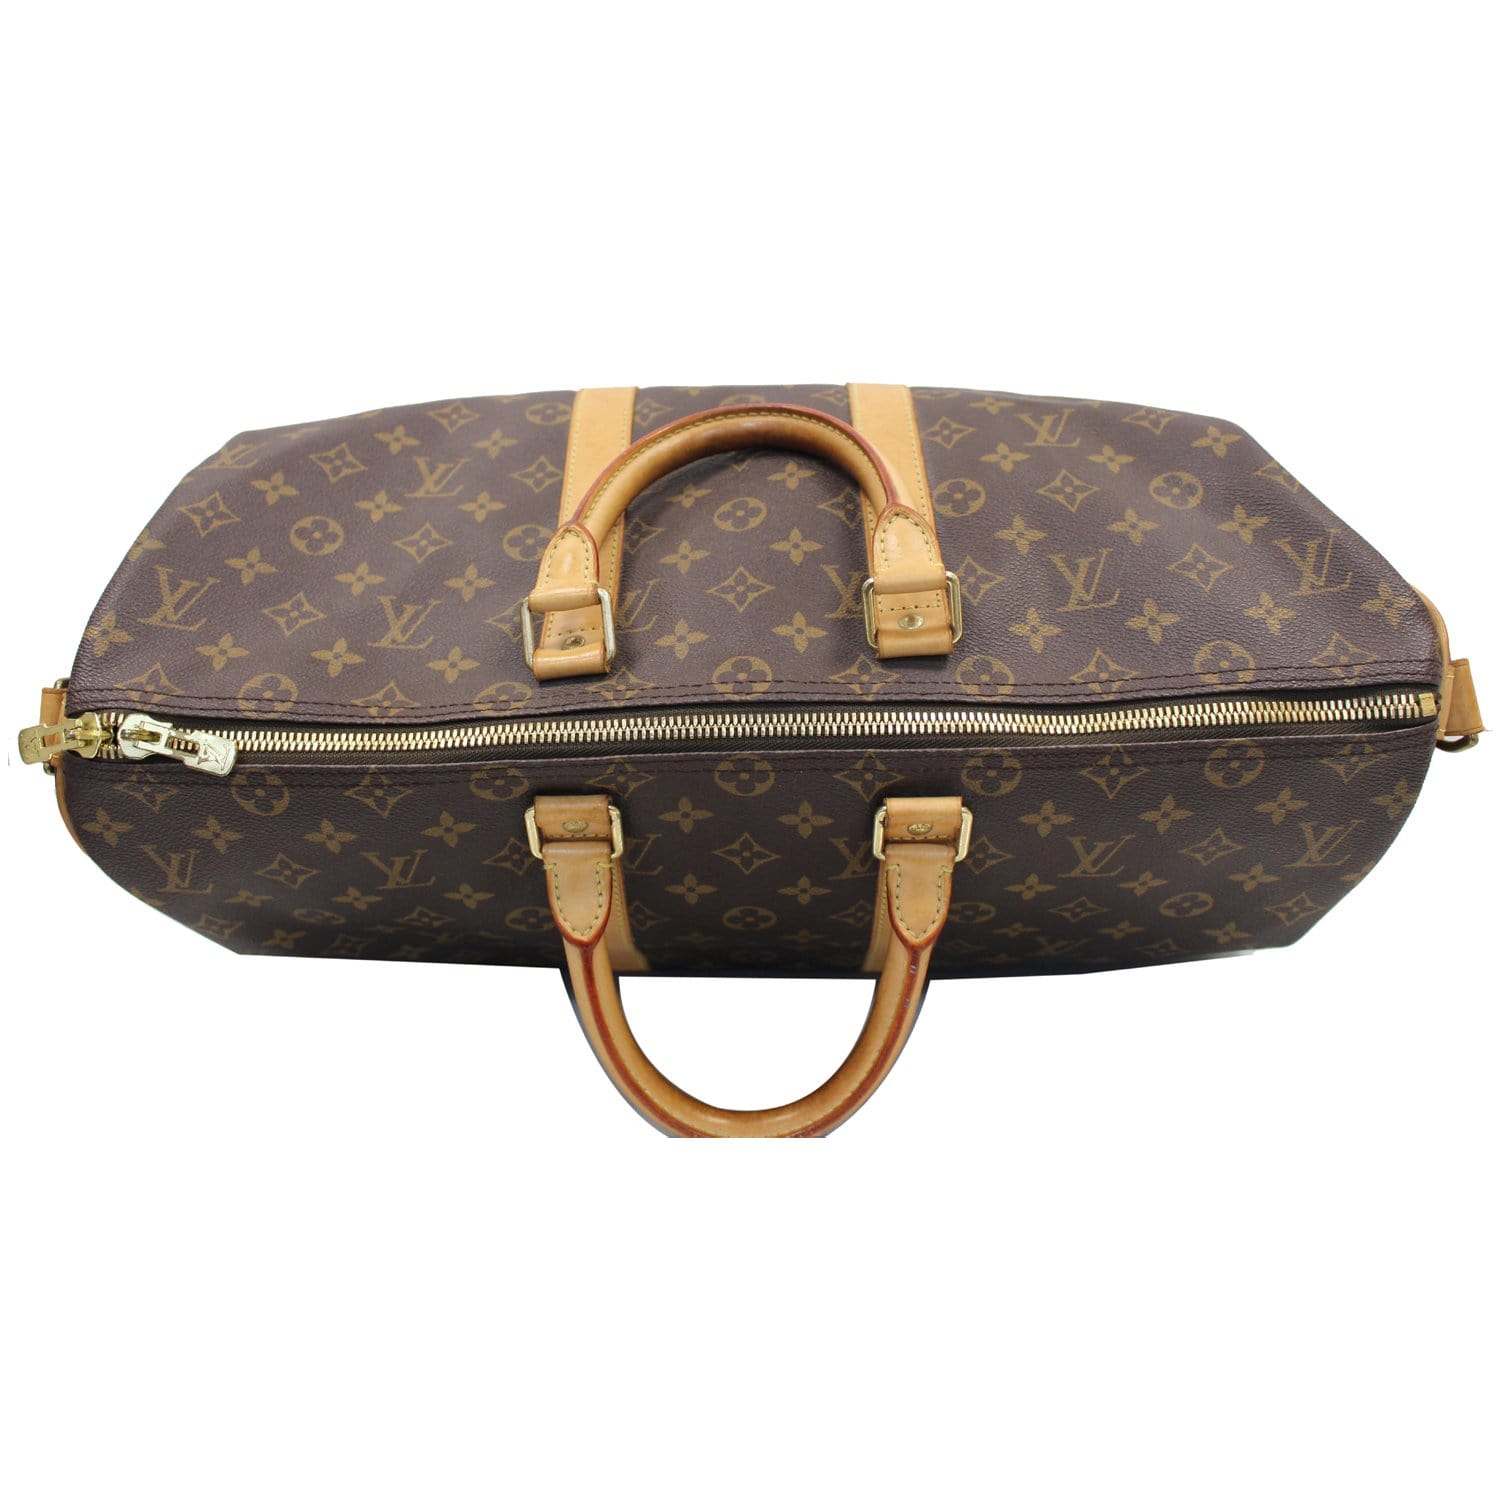 Louis+Vuitton+Keepall+Bandouliere+Duffle+45+Brown+Canvas for sale online